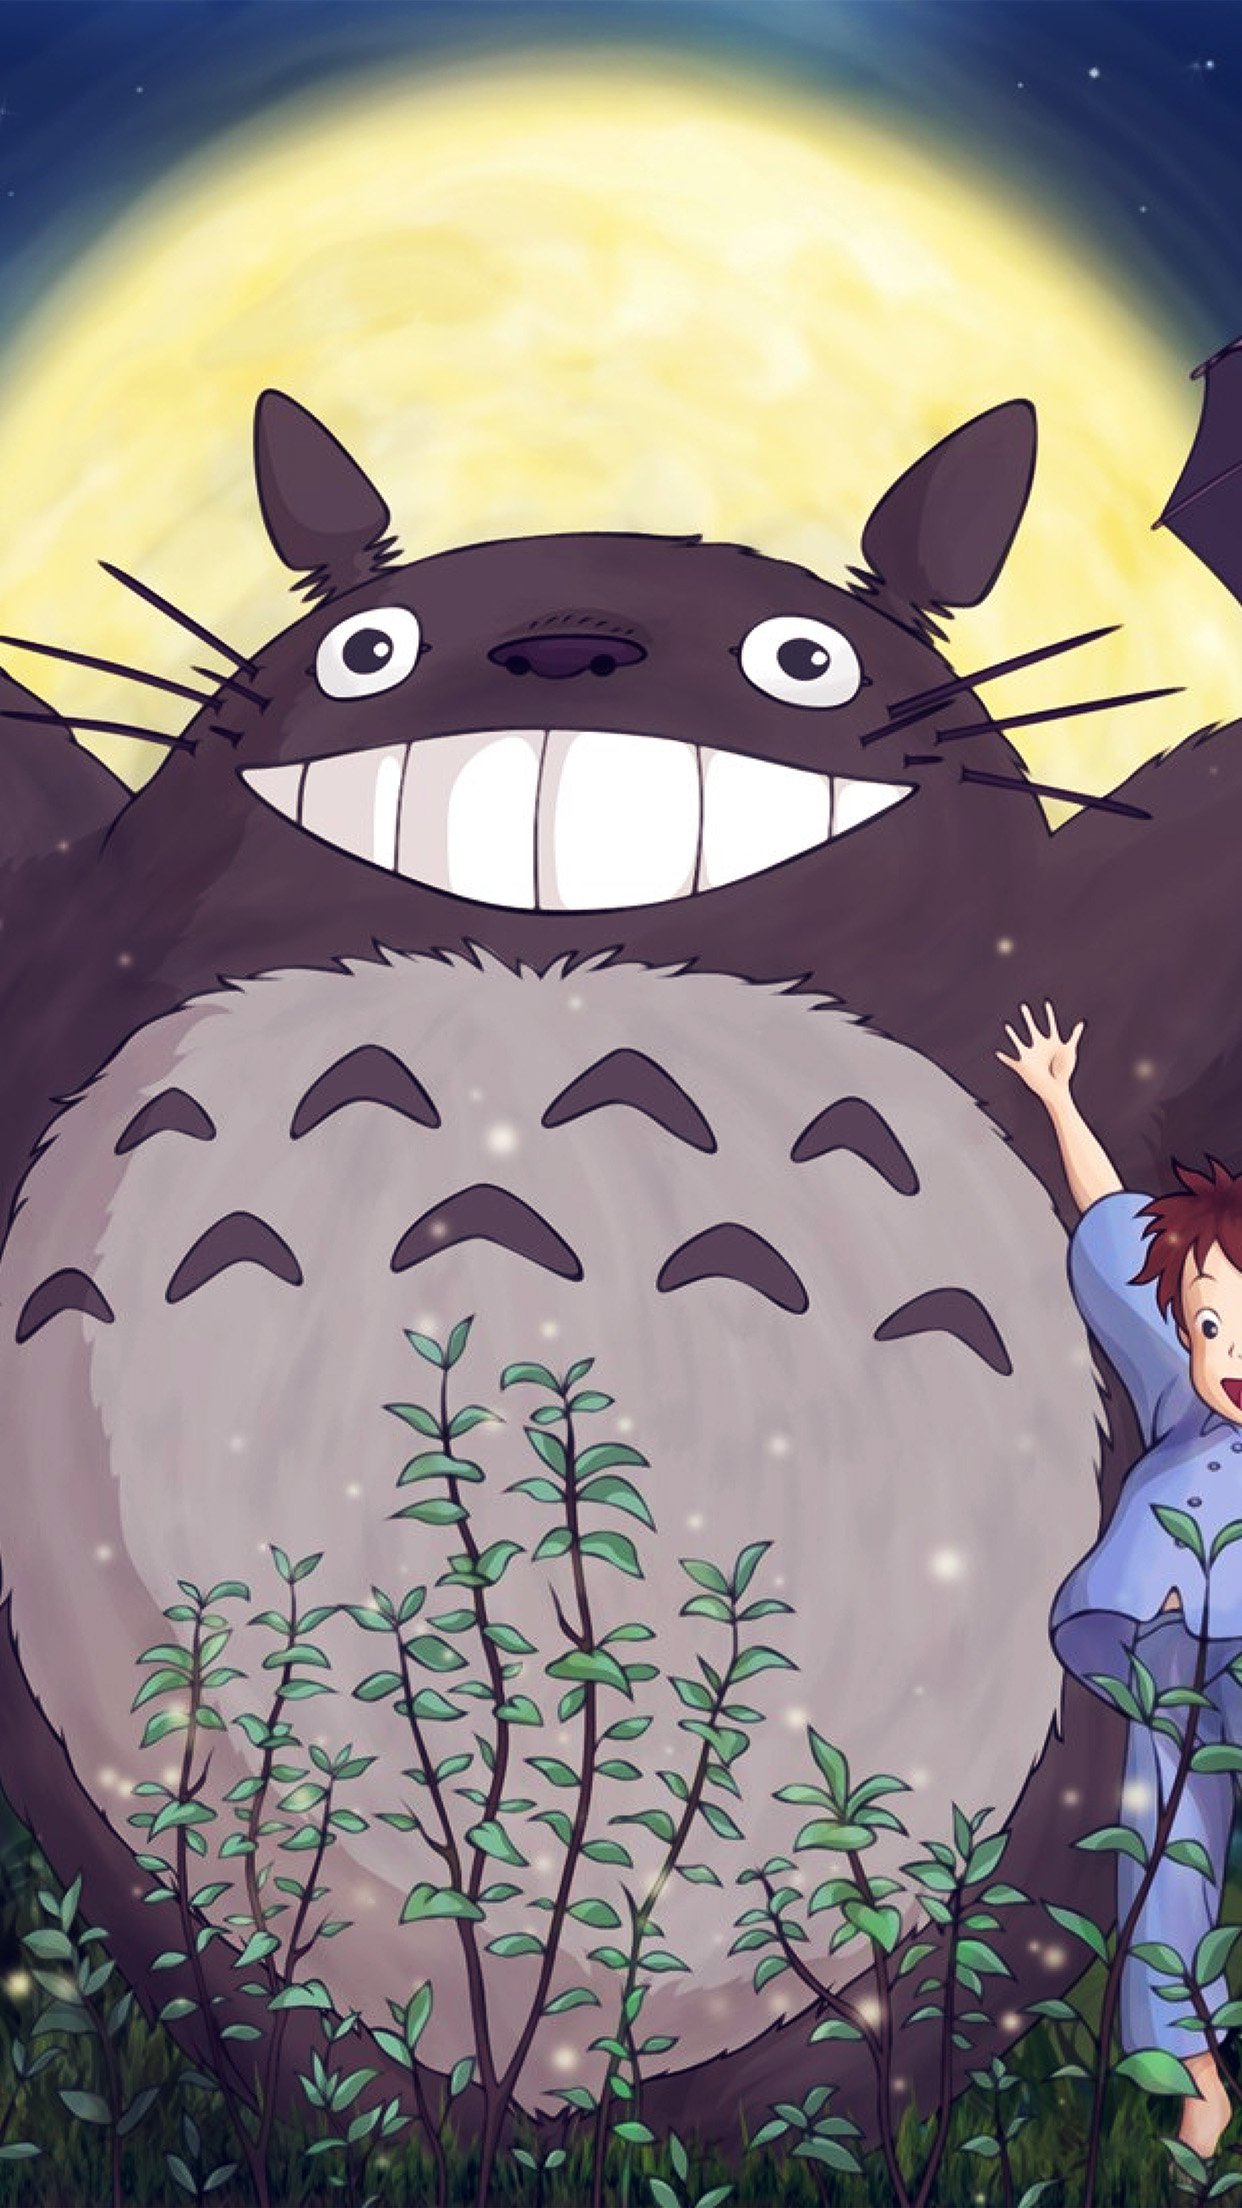 Totoro Forest Anime Cute Illustration Art Blue Android - Cute Wallpaper Iphone Xs Max - HD Wallpaper 